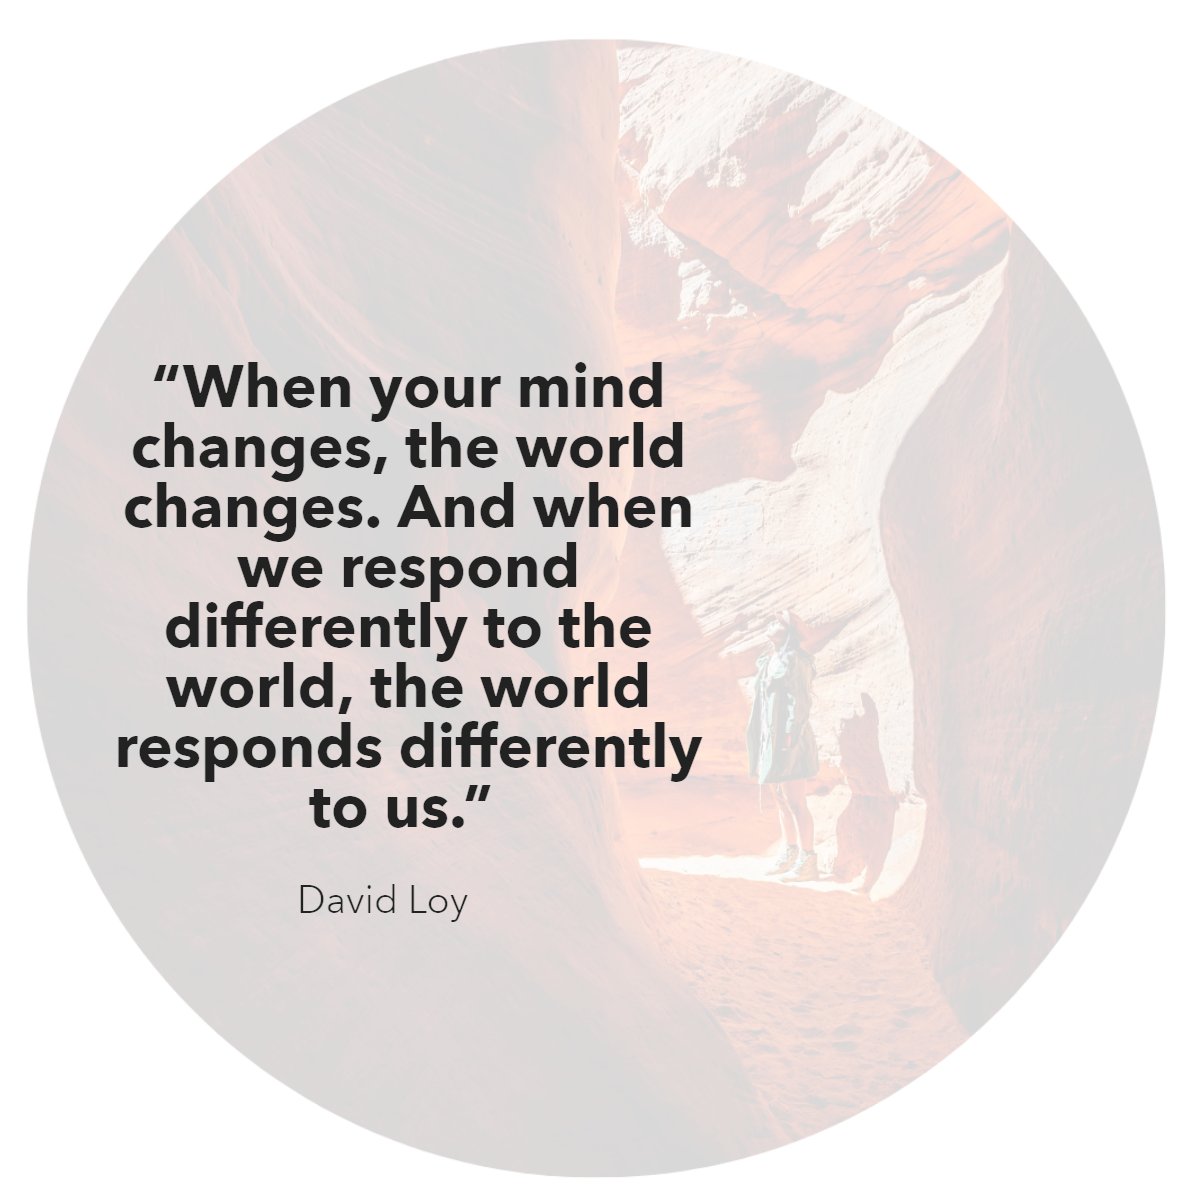 'When your mind changes, the world changes. And when we respond differently to the world, the world responds differently to us'. 
— David Loy 👌

#changes #quotes #inspirationalquoteoftheday #wisdomquotes #wisdomgoals